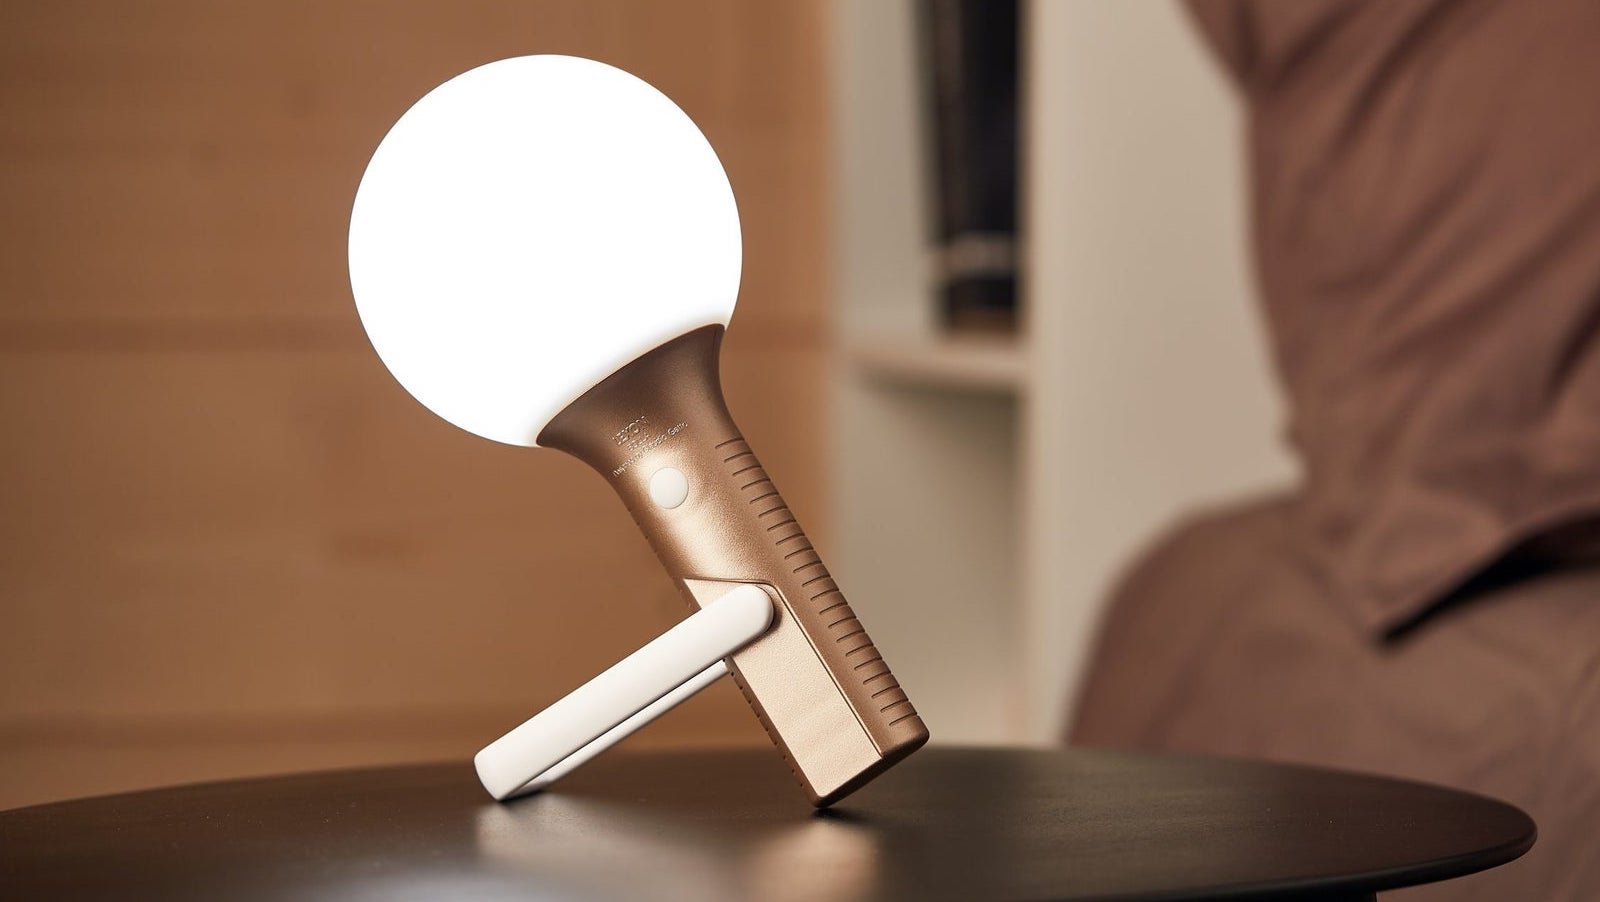 Lexon Bolla+ multi-position LED lamp can be suspended or placed using its adjustable handle